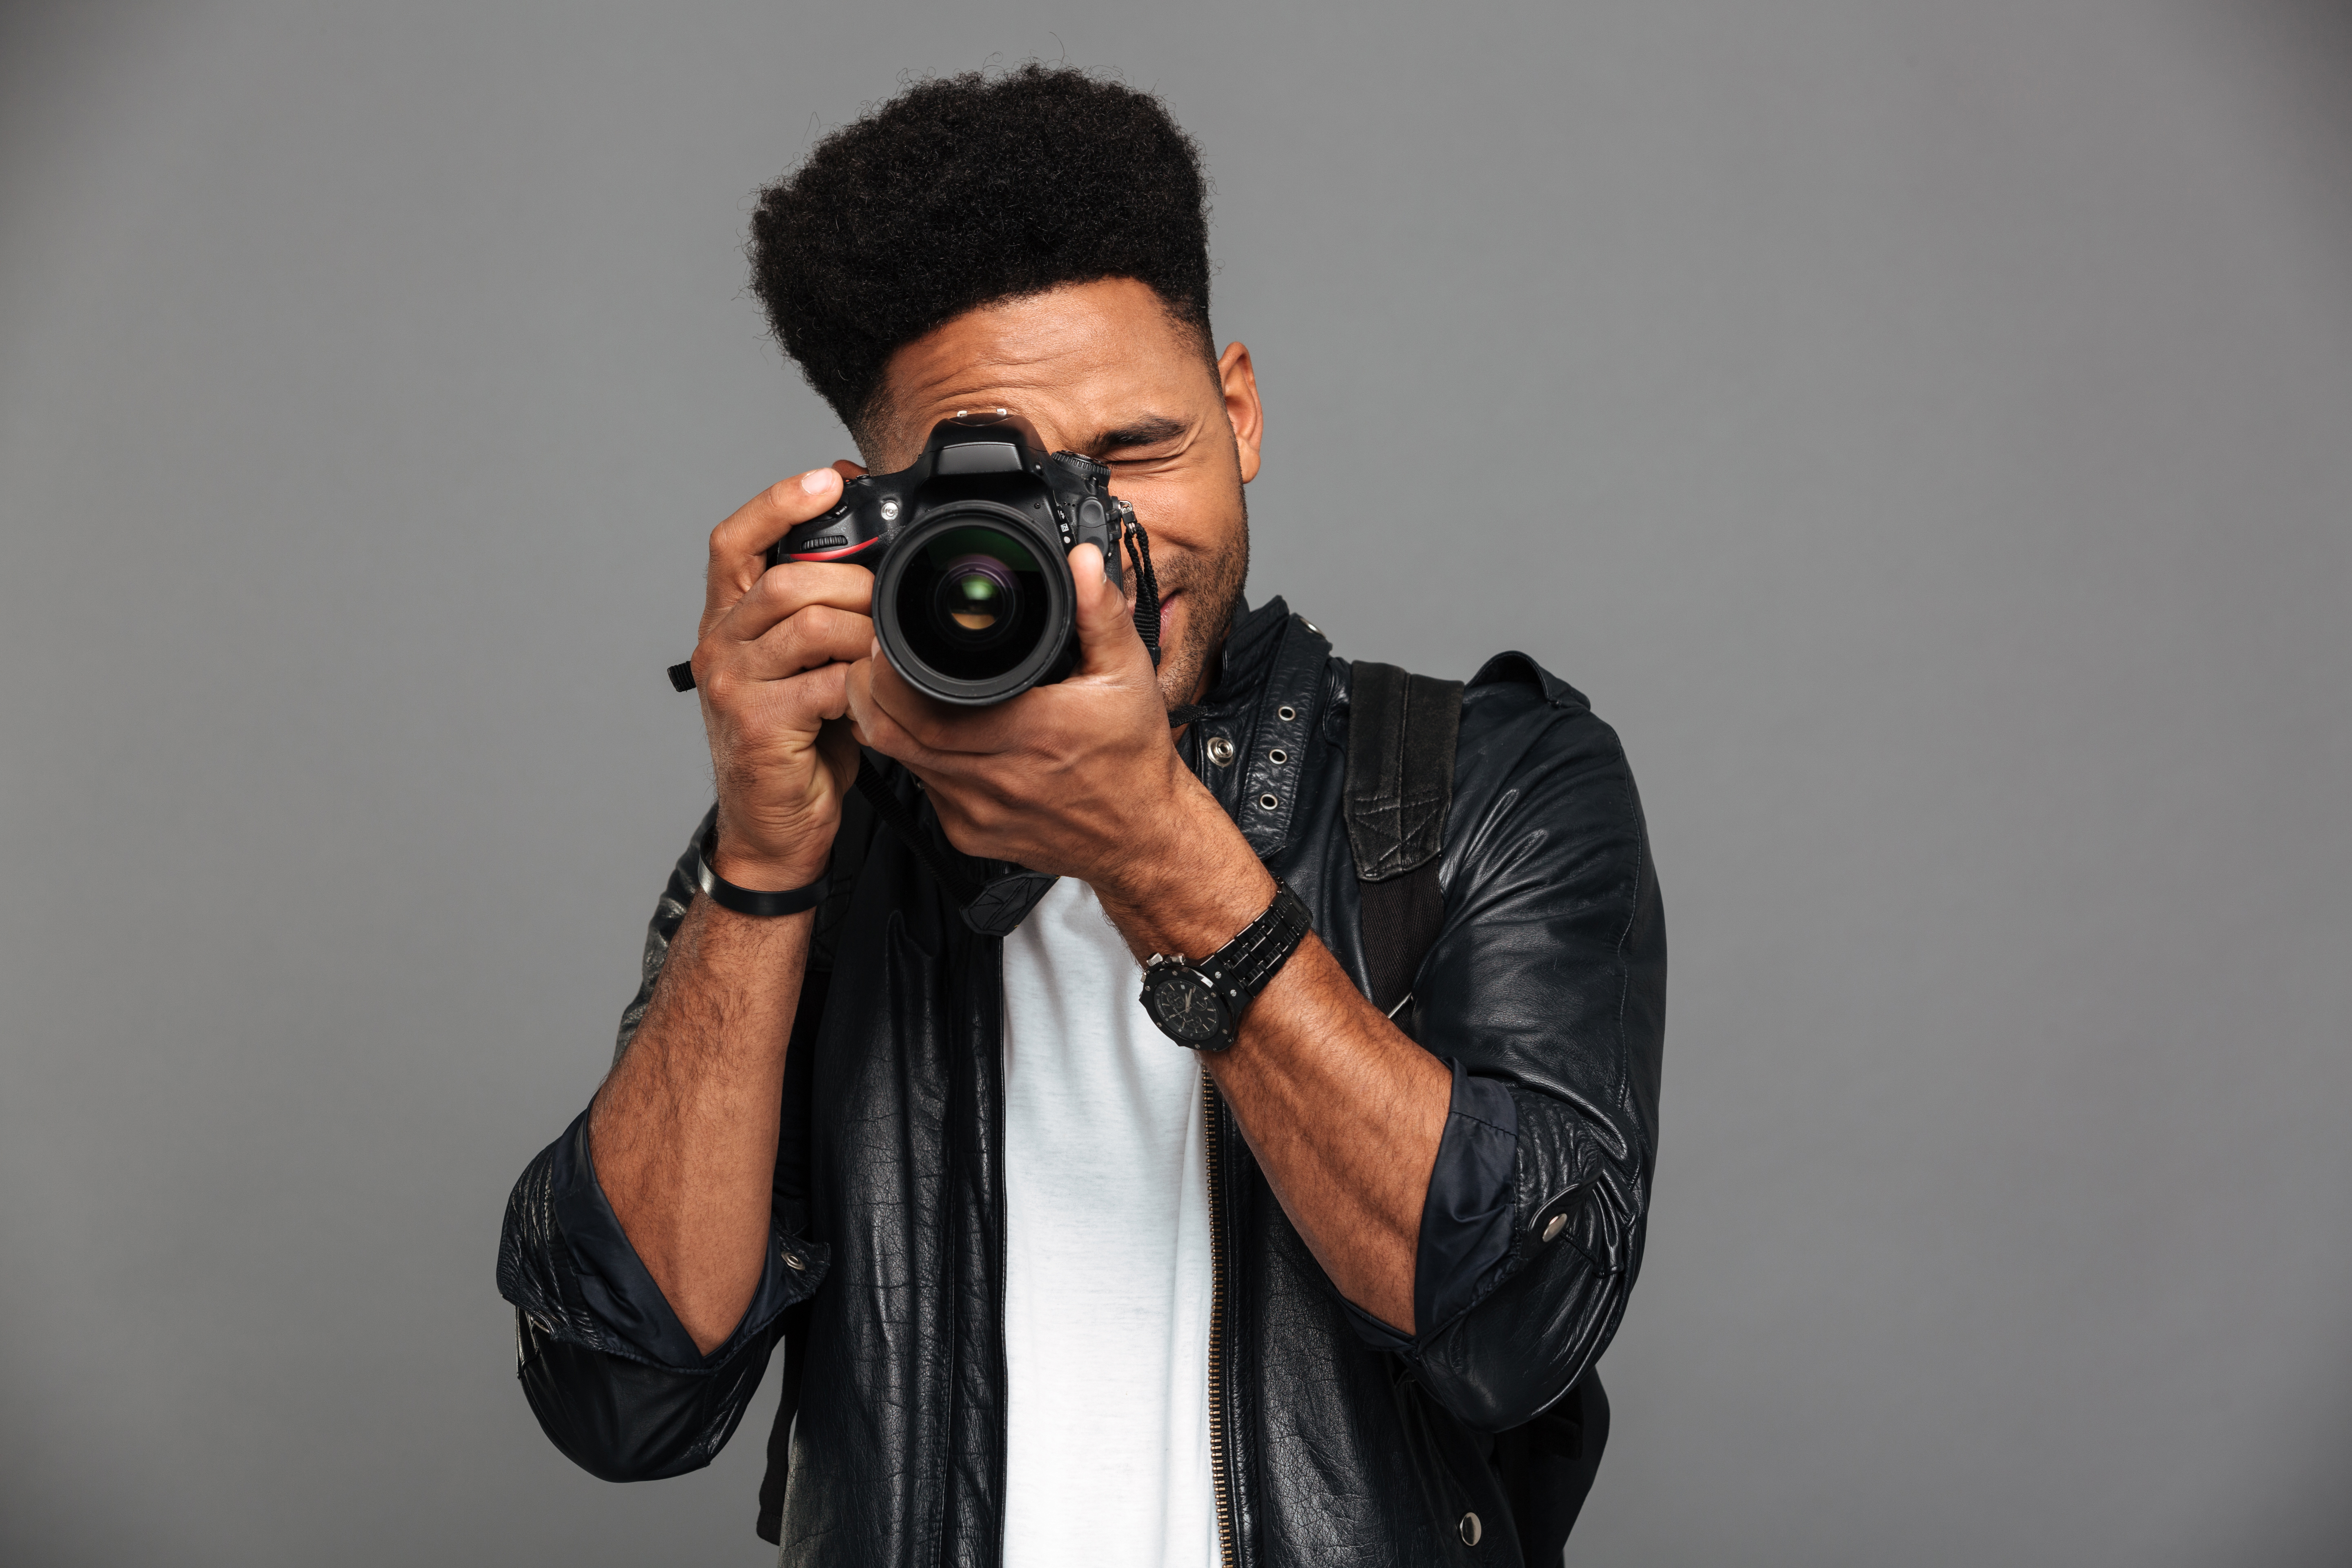 handsome-african-guy-with-stylish-haircut-taking-photo-digital-camera.jpg (11.19 MB)